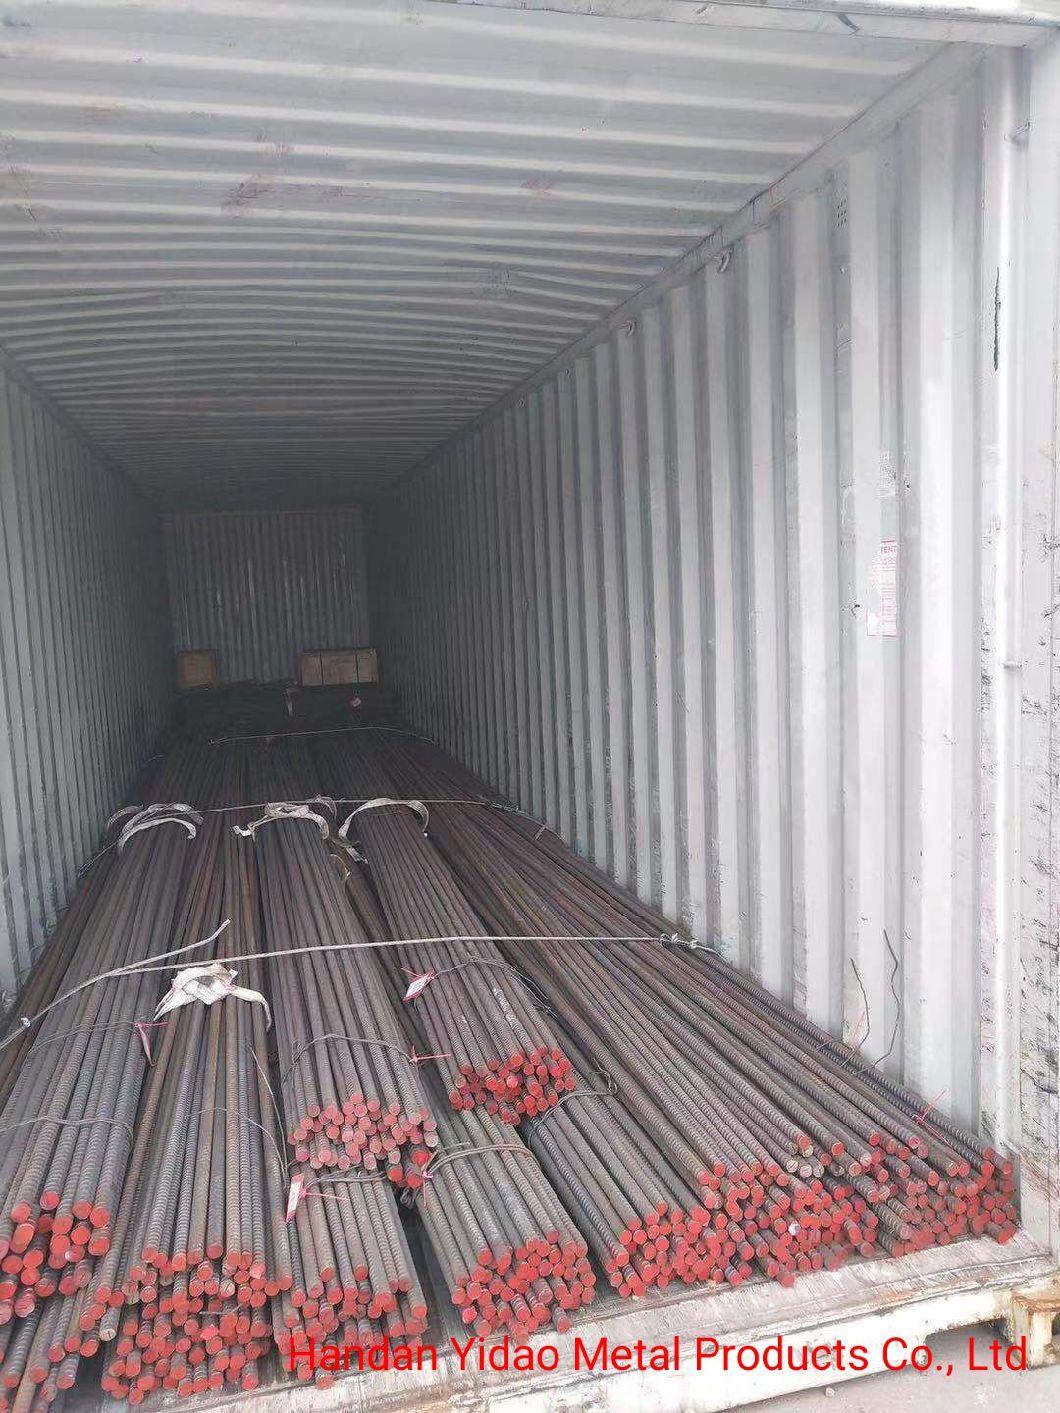 Psb1080-36 Hot Rolled Thread Bars as Mining or Tunneling Anchors for Roof and Sidewalls